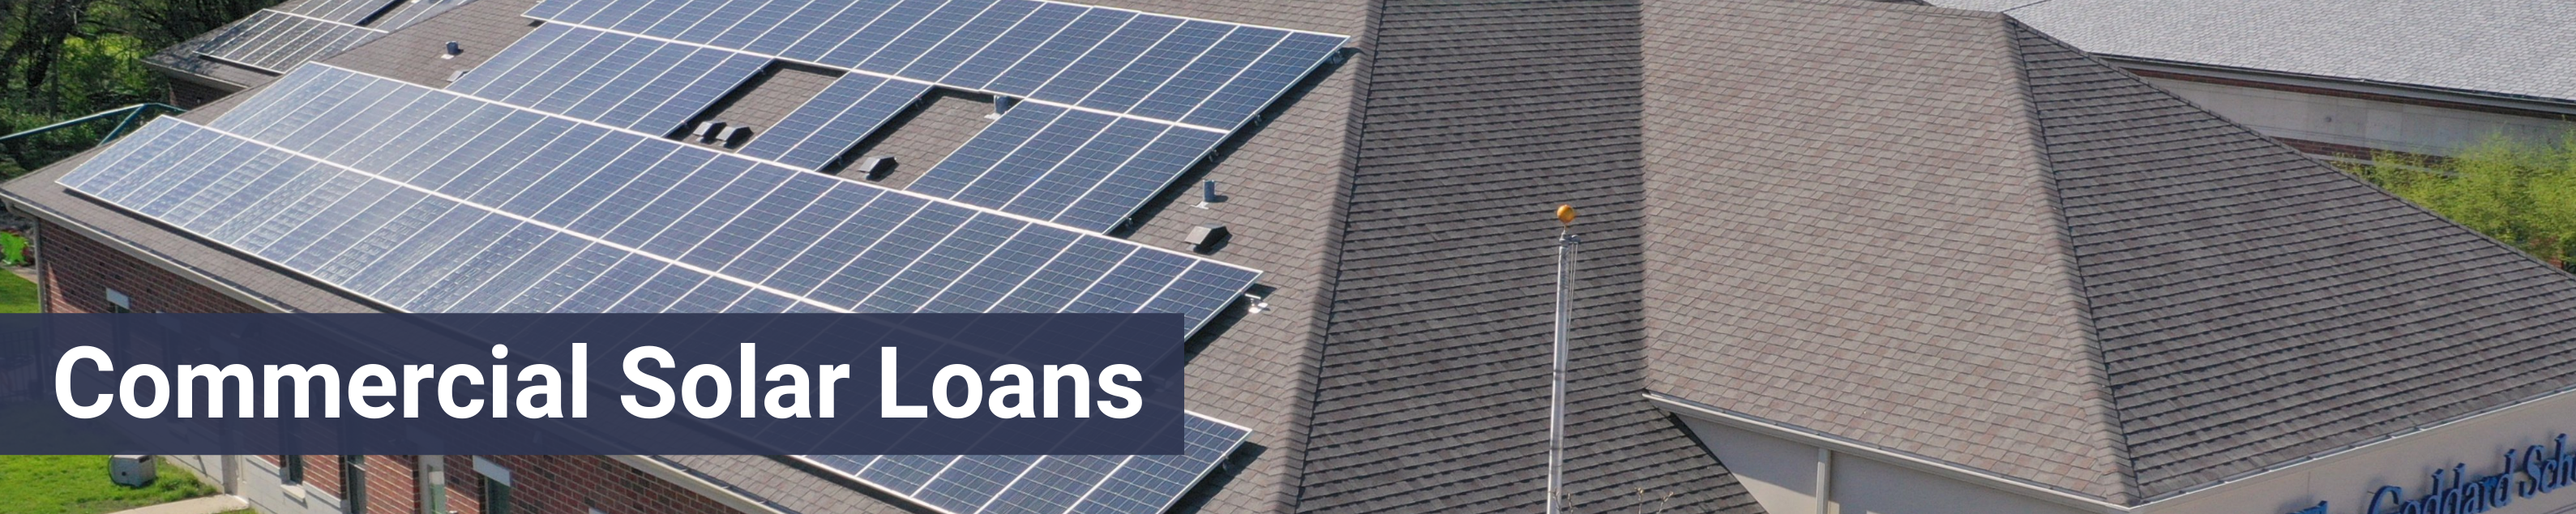 Solar panels on commercial building roof top header image